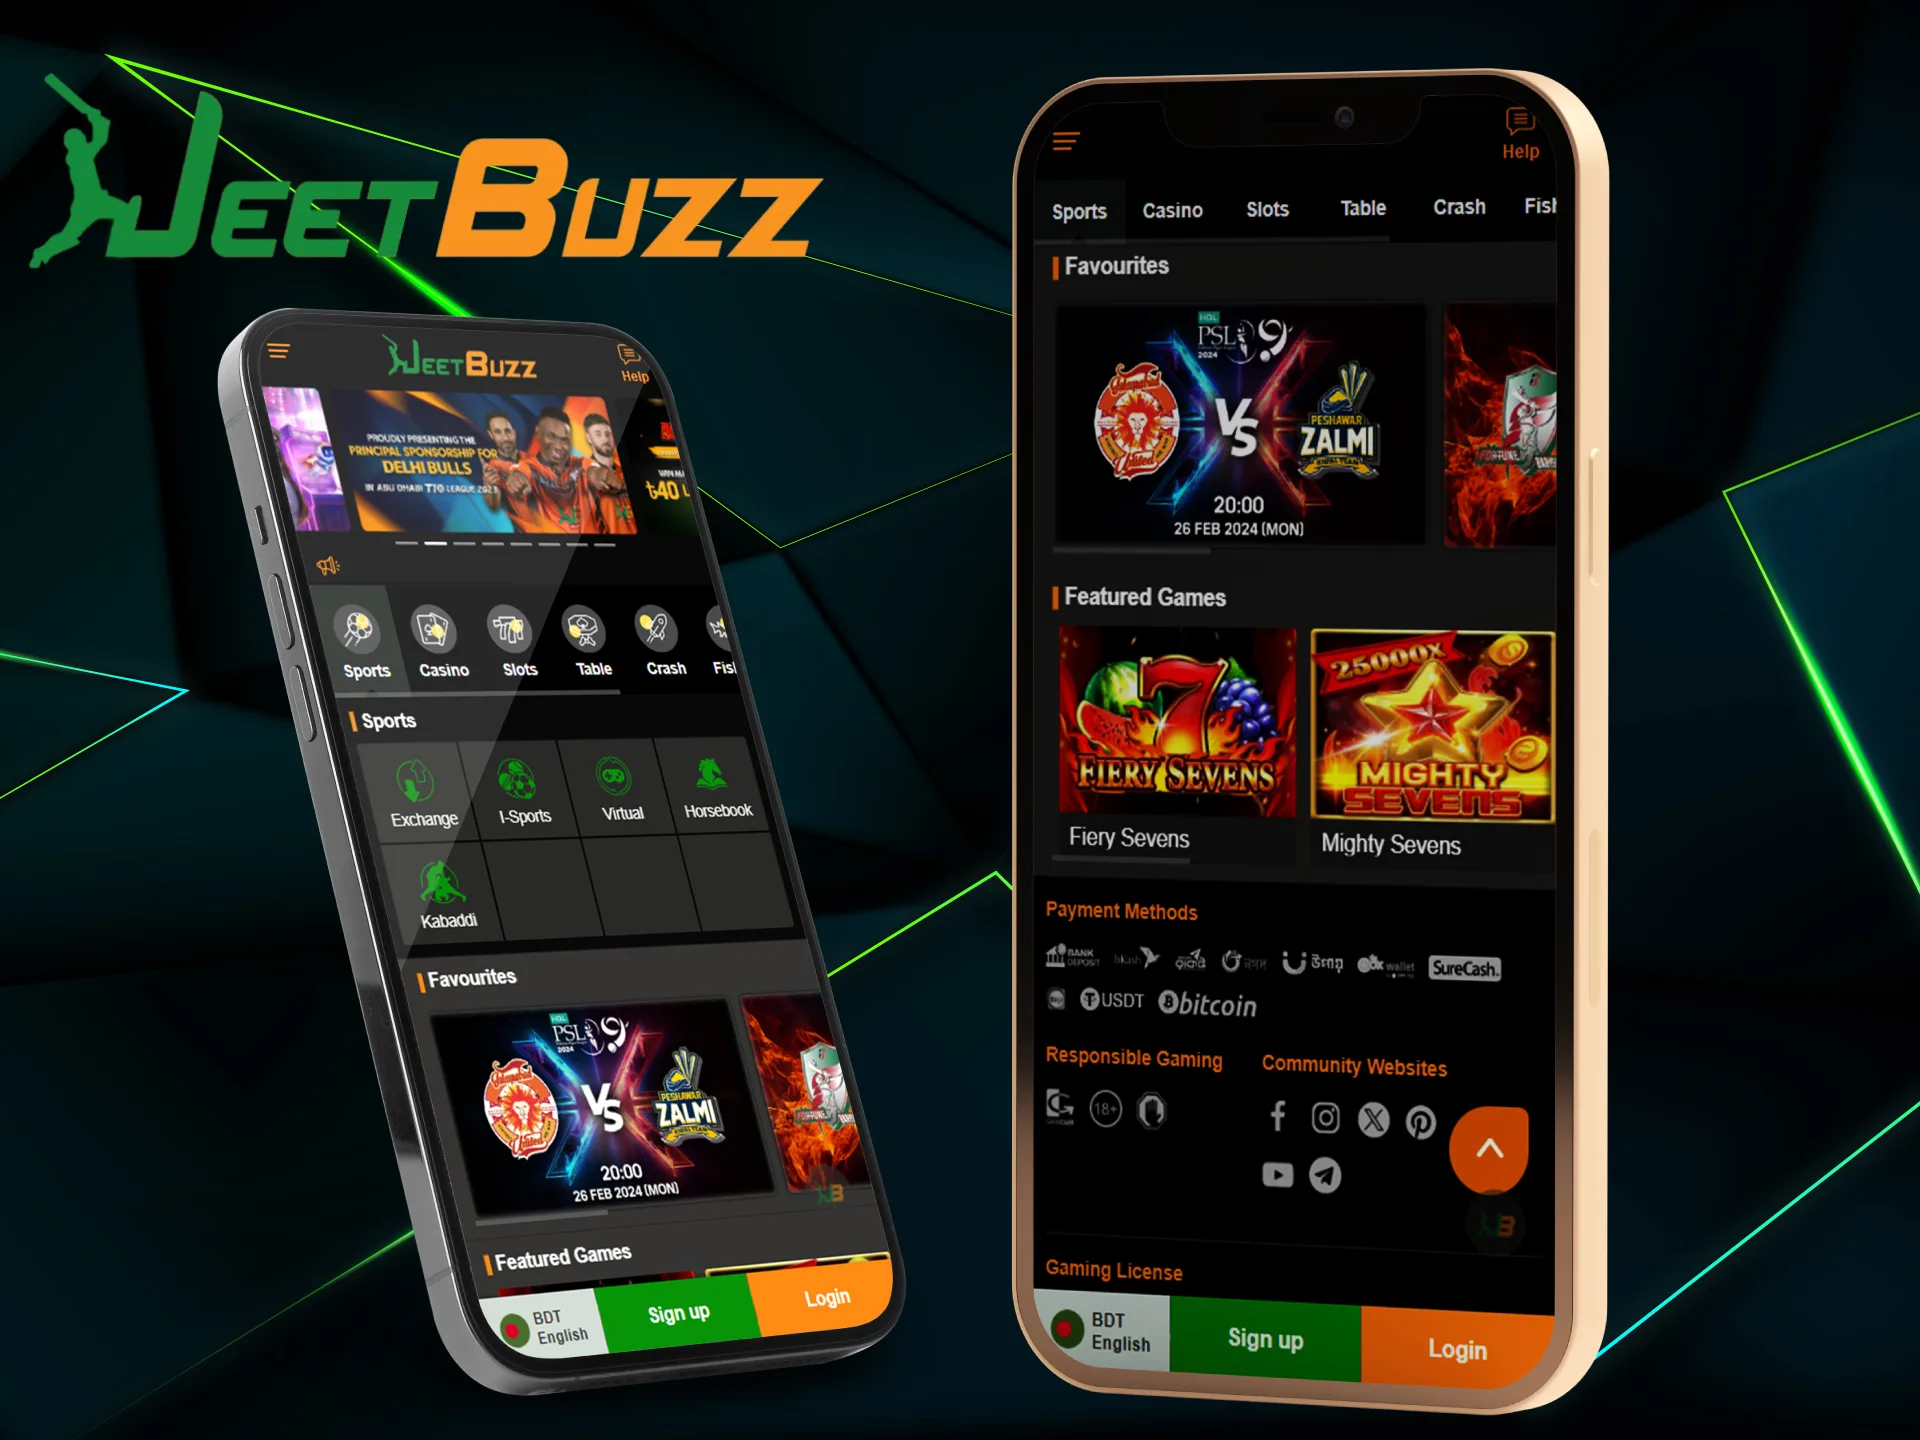 Use the browser version of JeetBuzz to open from your iPhone or iPad.